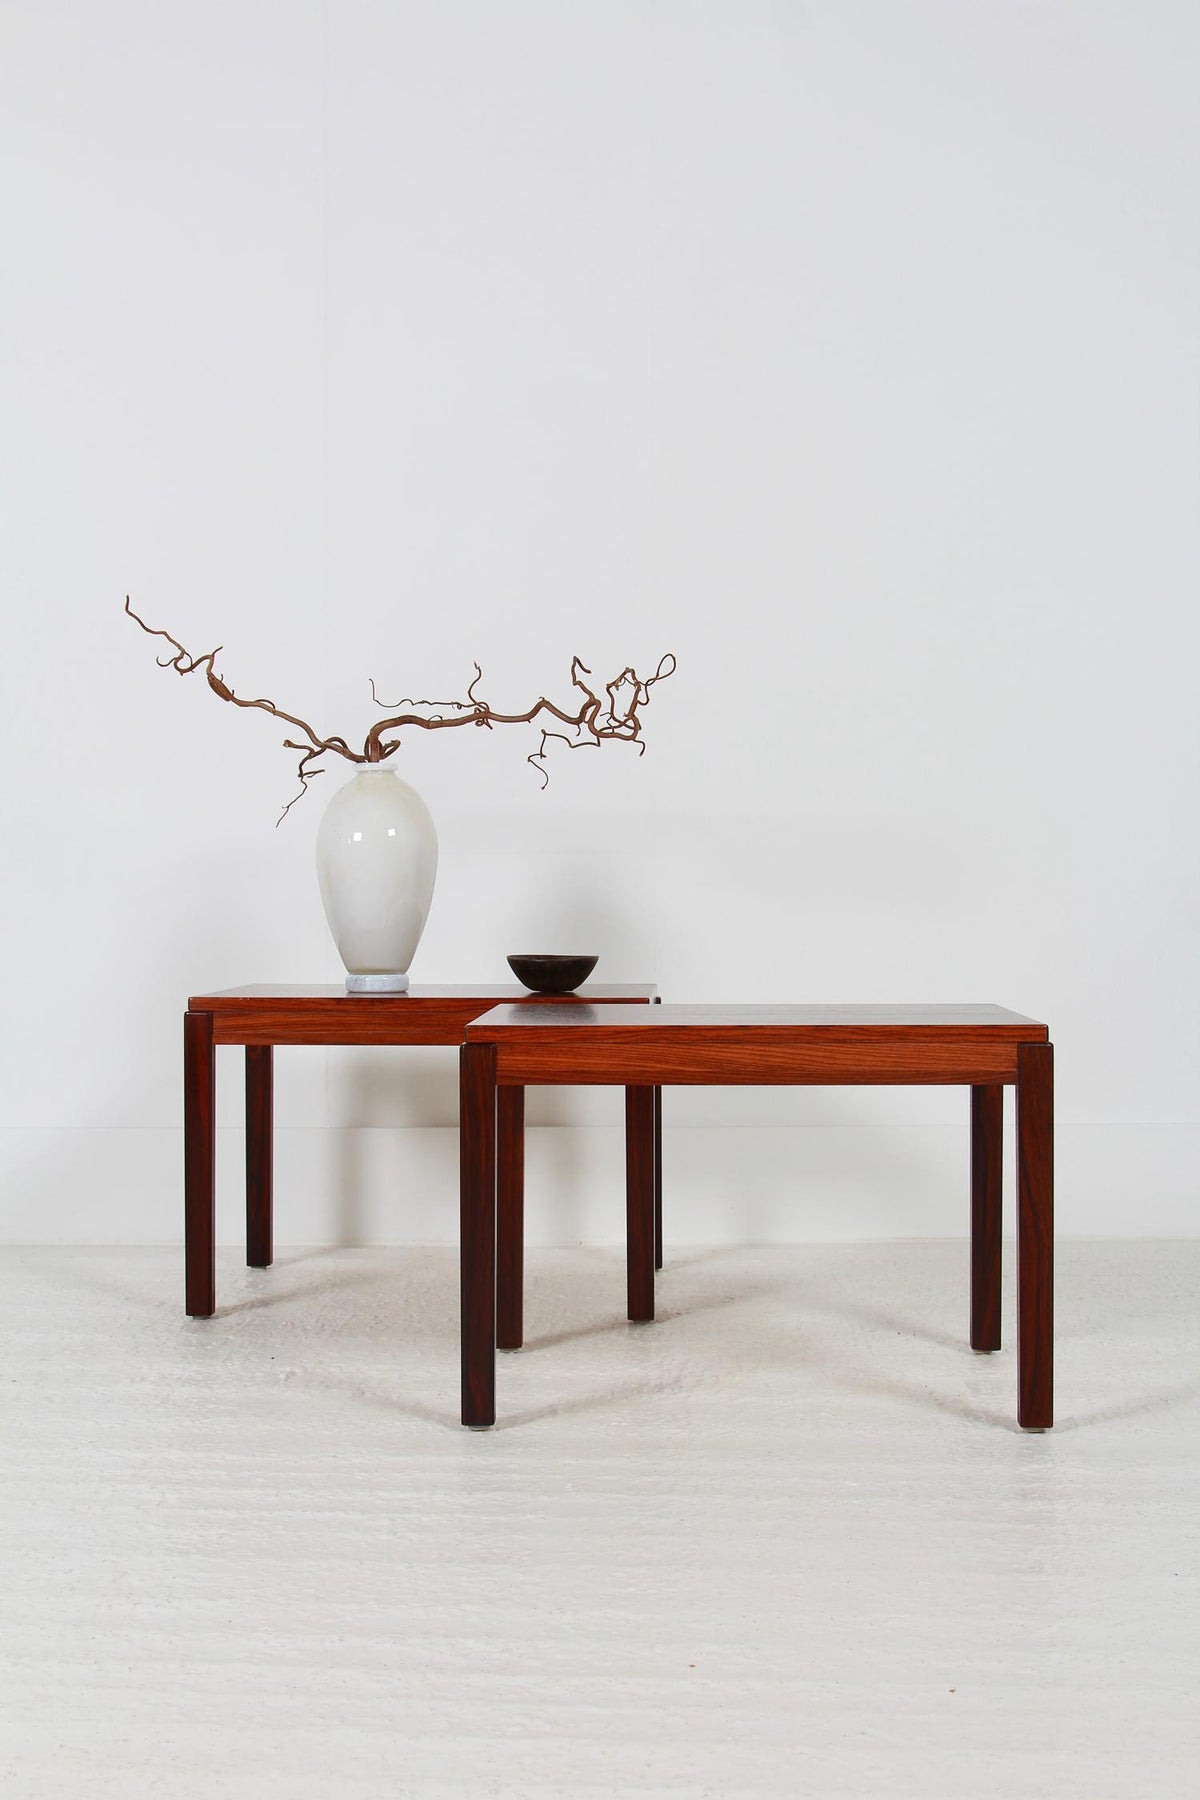 Handsome Pair of Swedish Rosewood Coffee Tables